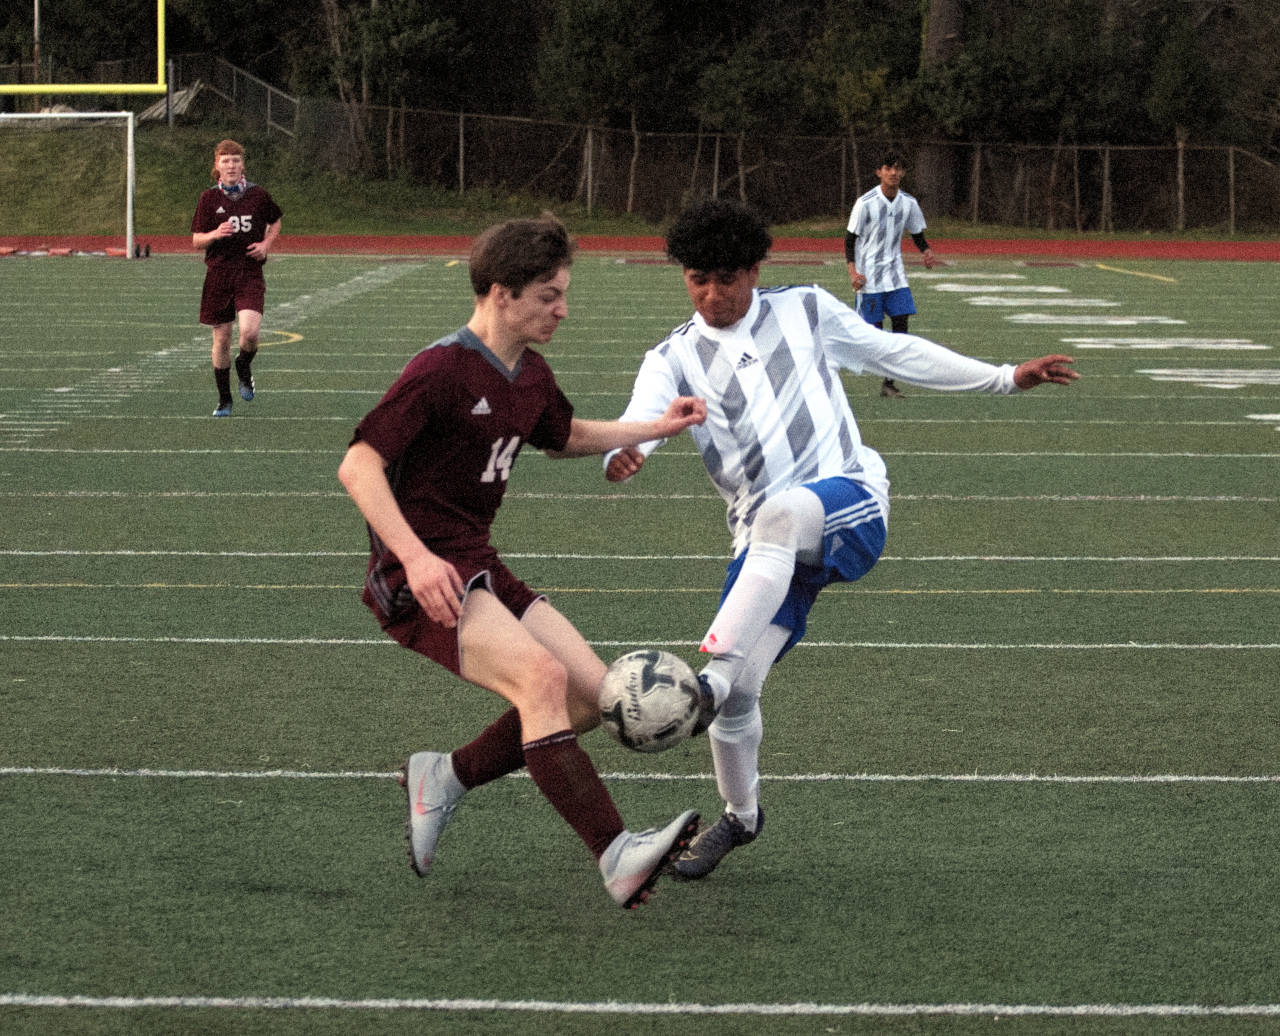 RYAN SPARKS | THE DAILY WORLD Montesano’s Cole Ekerson (14) and Elma’s Rodrigo Luna battle for possession during Elma’s 3-0 victory on Wednesday at Jack Rottle Field in Montesano.